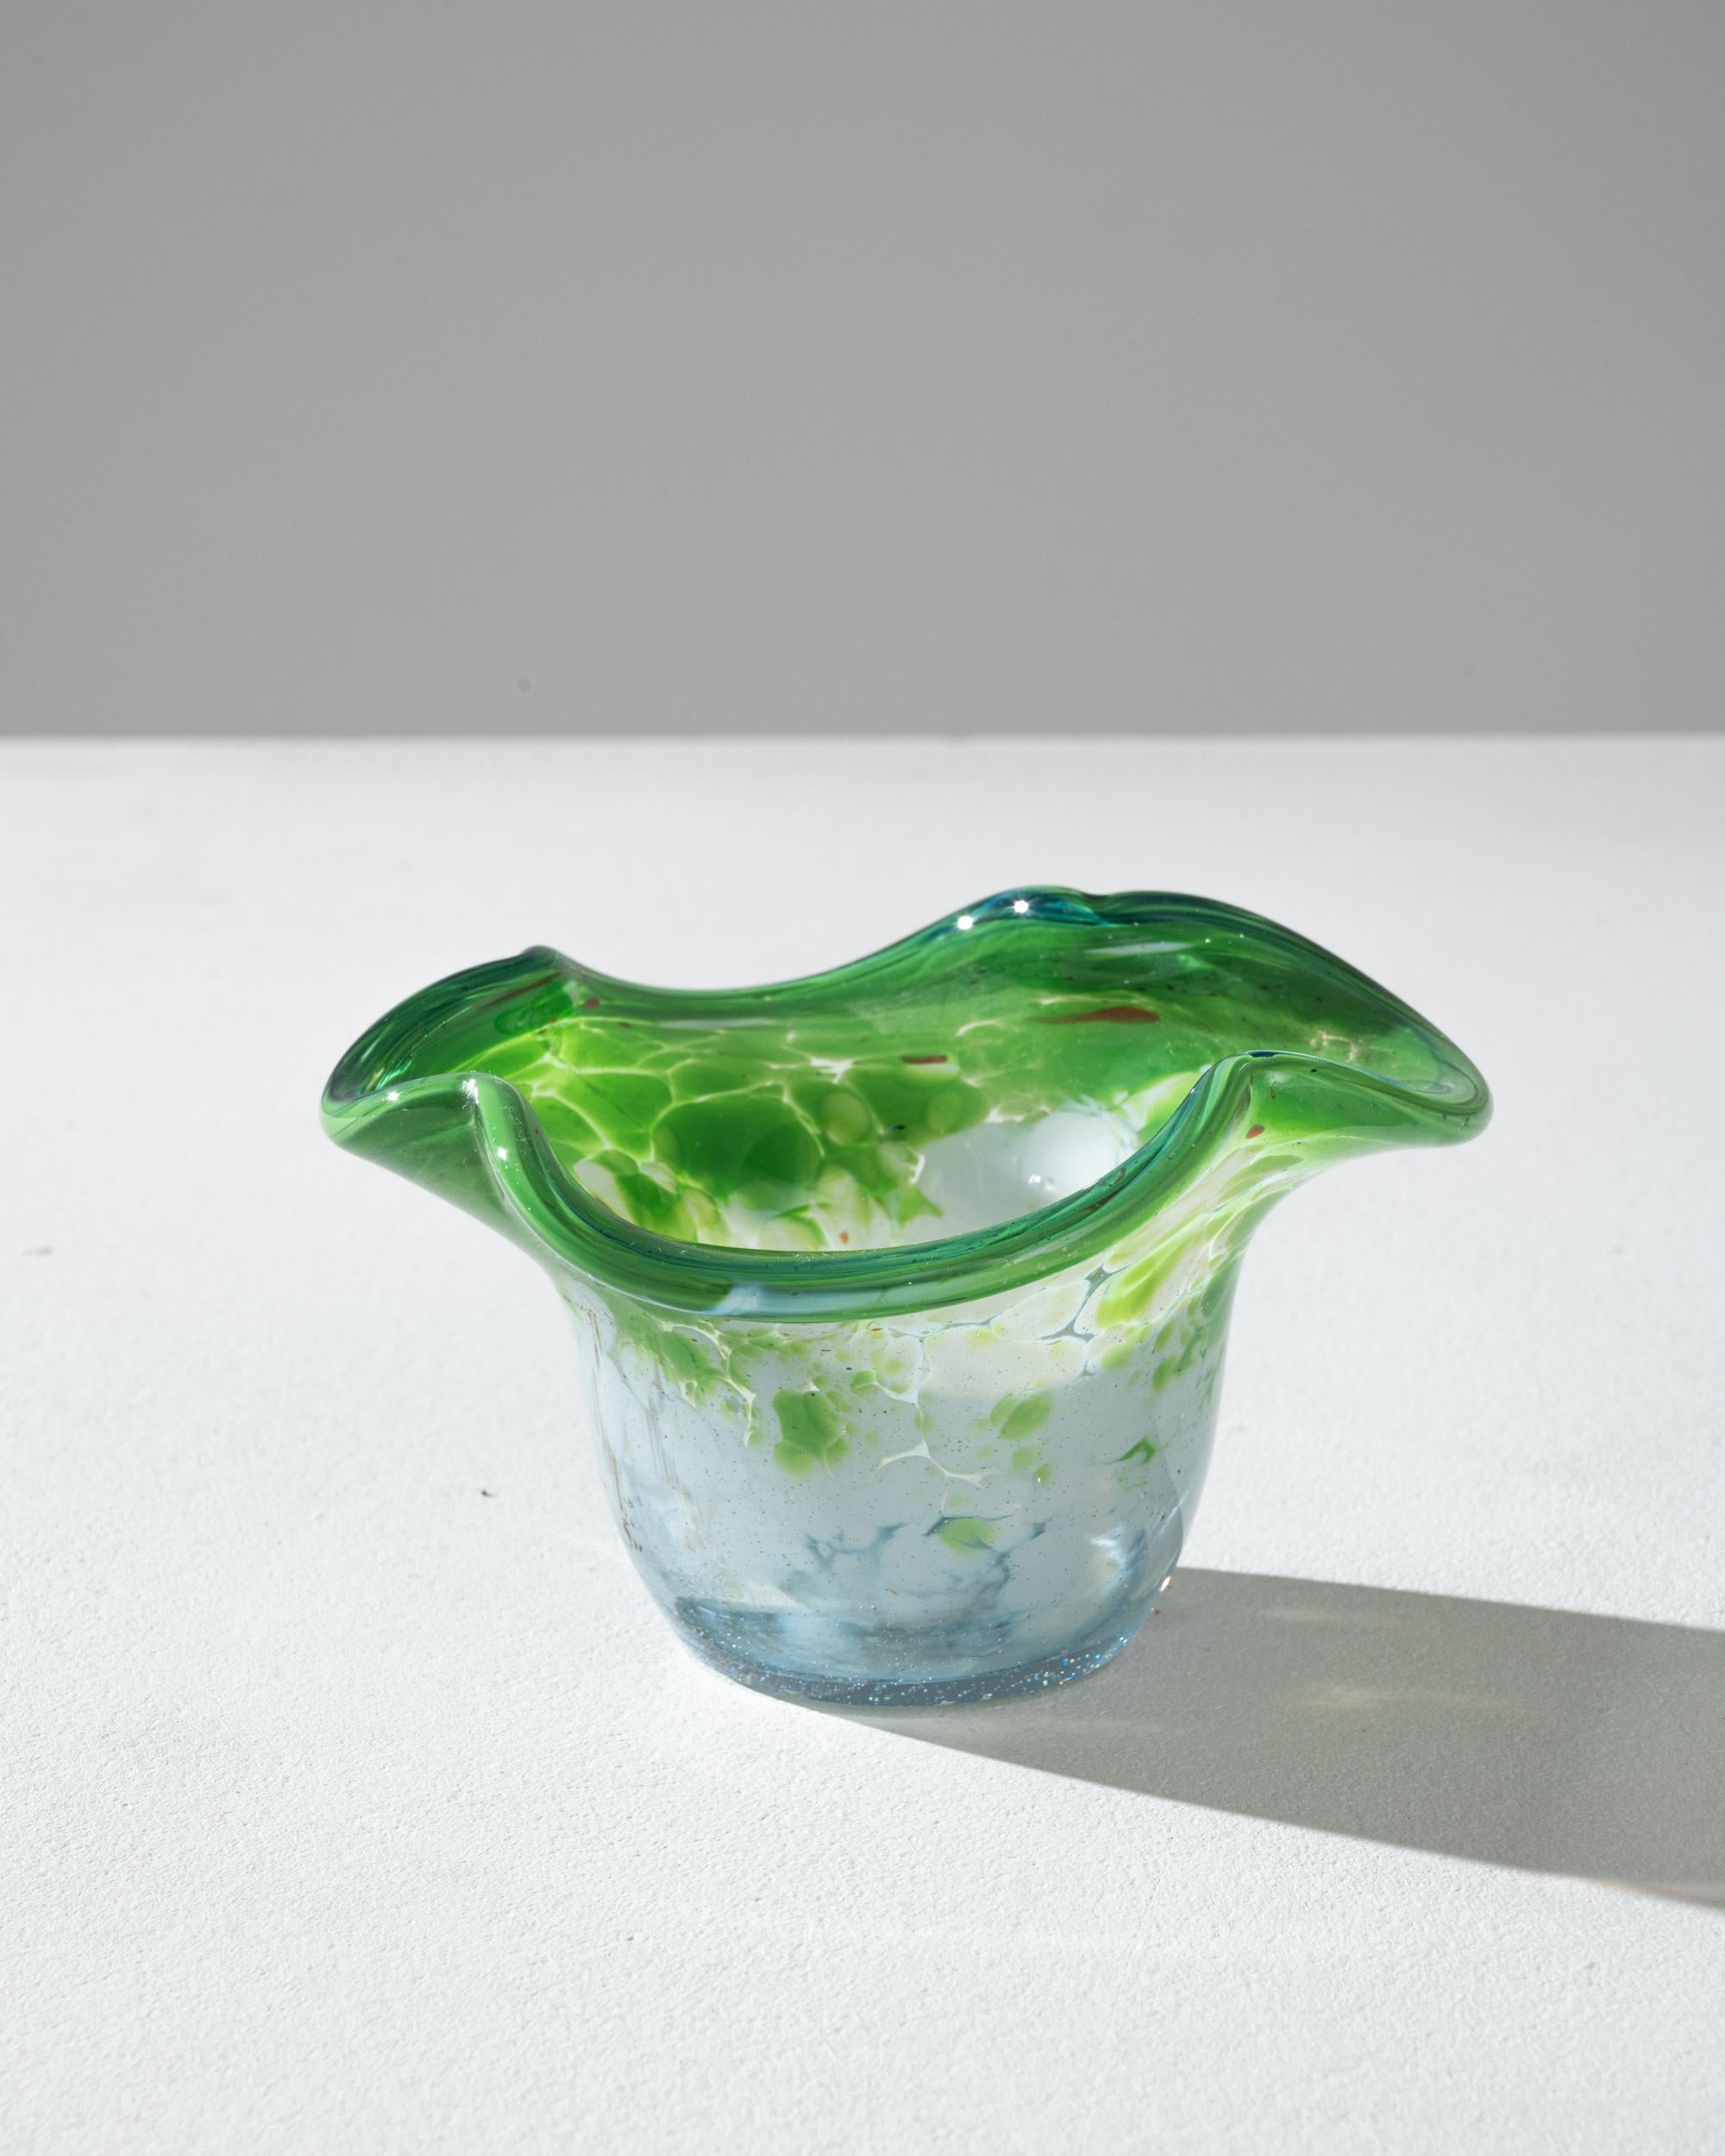 A charming piece of vintage glasswork, this small dish has an elegant, amphibious quality. Made in Belgium in the 20th century, the gentle asymmetric curves of the rounded form and the liquid pattern of swirling spots which decorate its surface